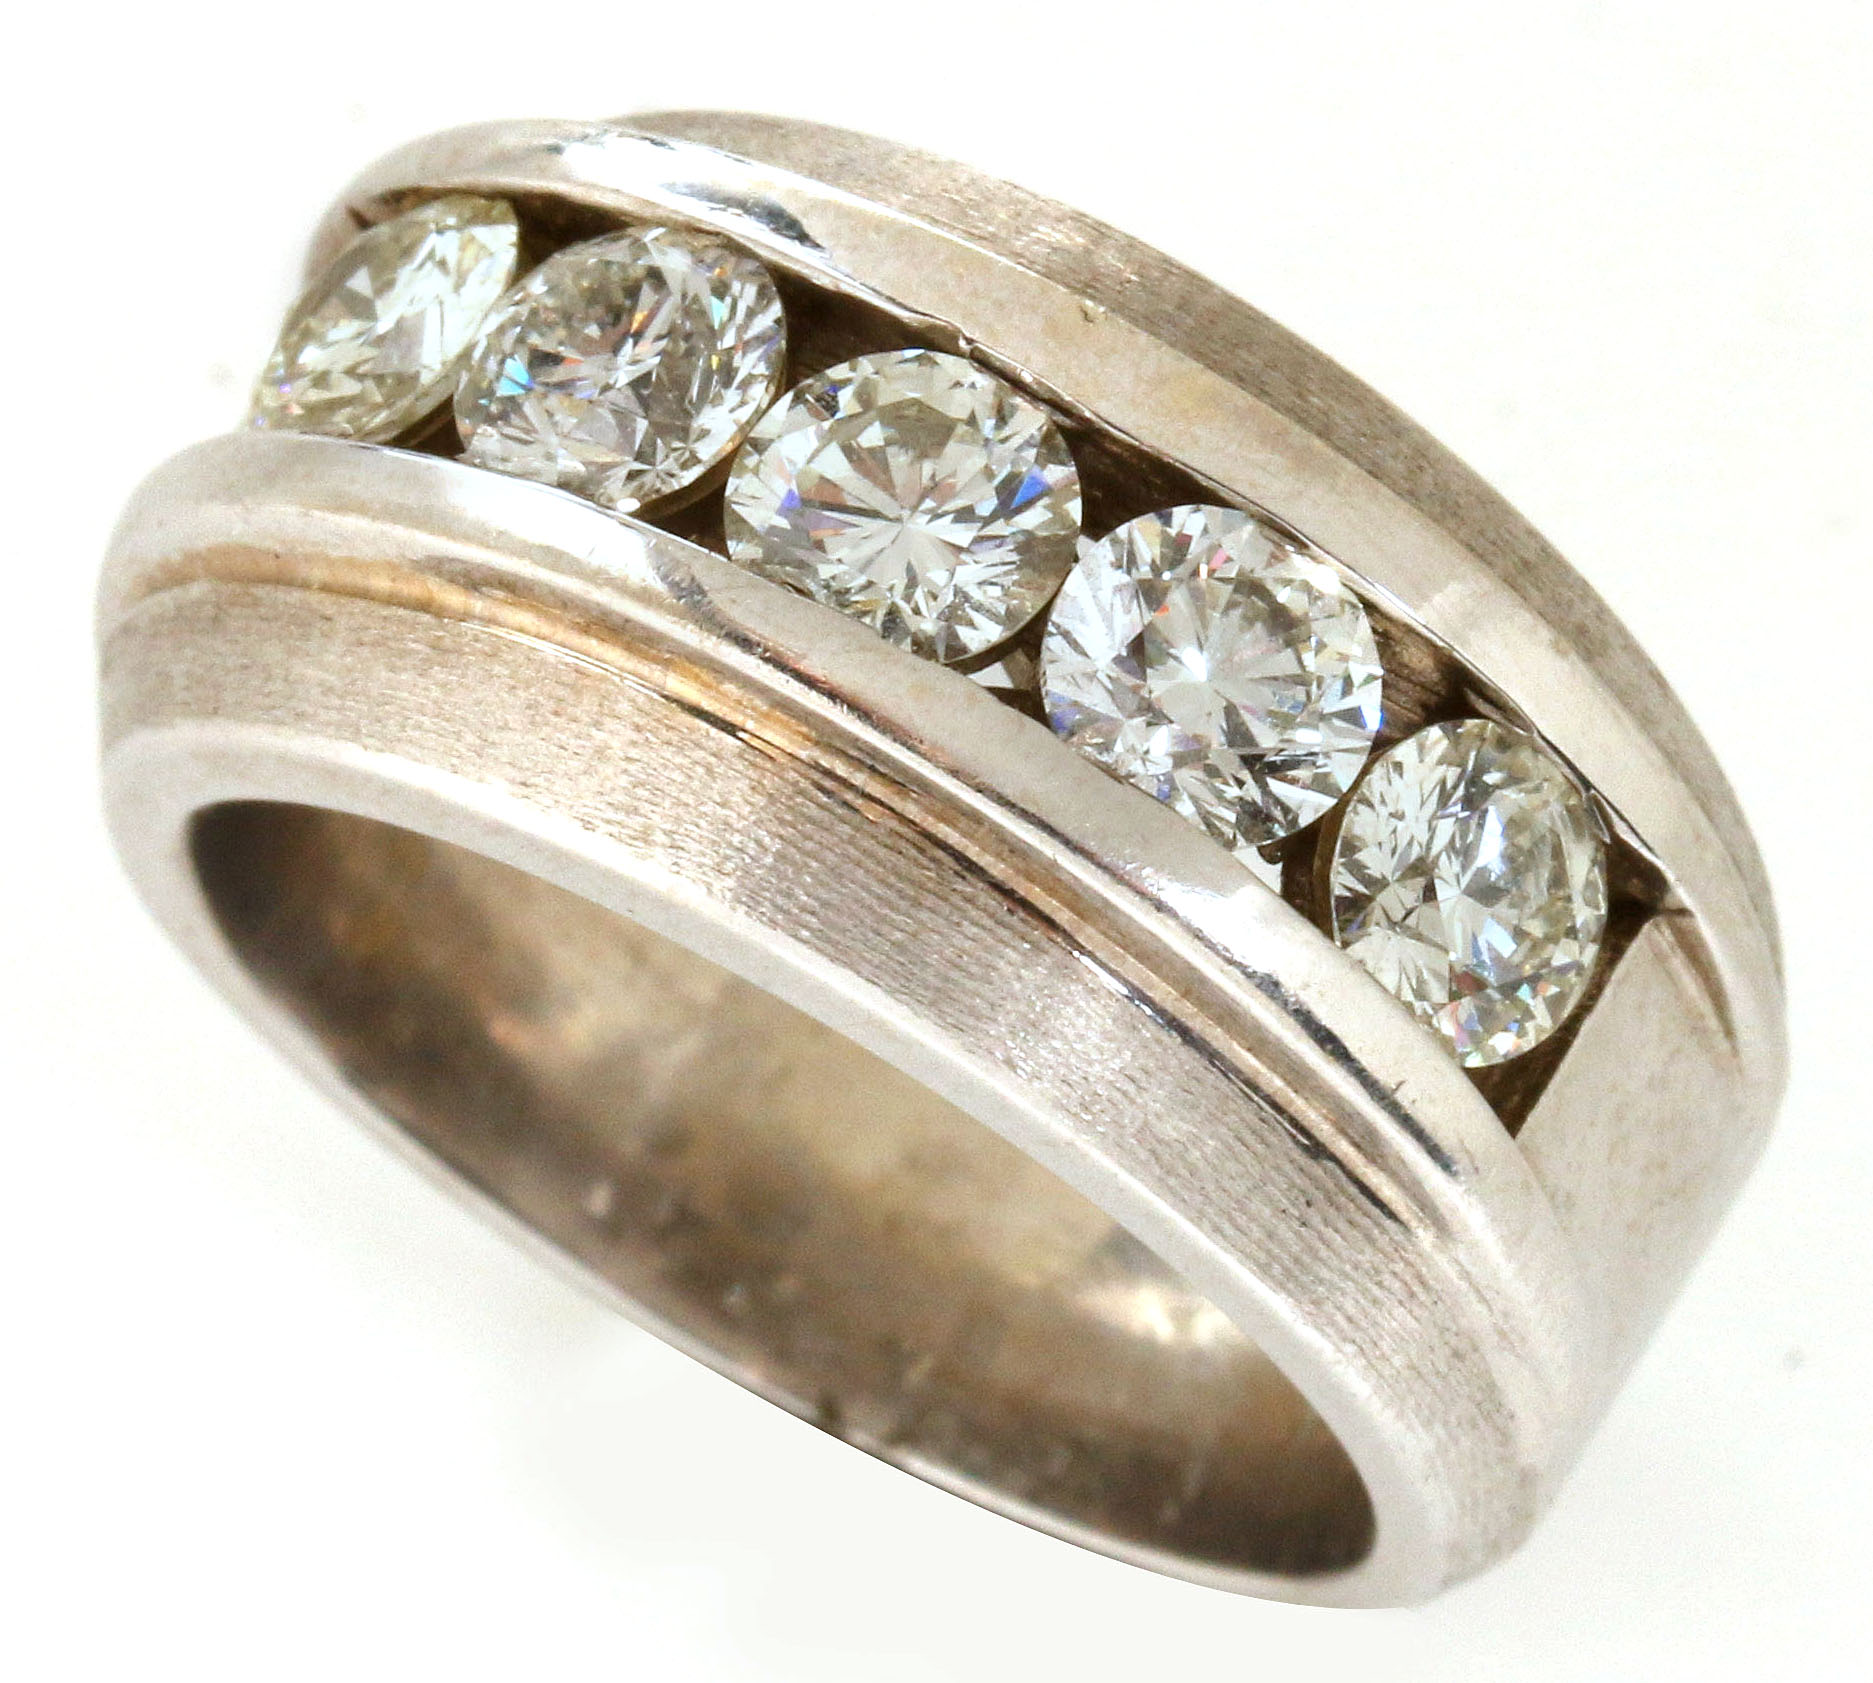 A GENT'S 14K DIAMOND BAND APPROX 2.5 CARATS TOTAL 